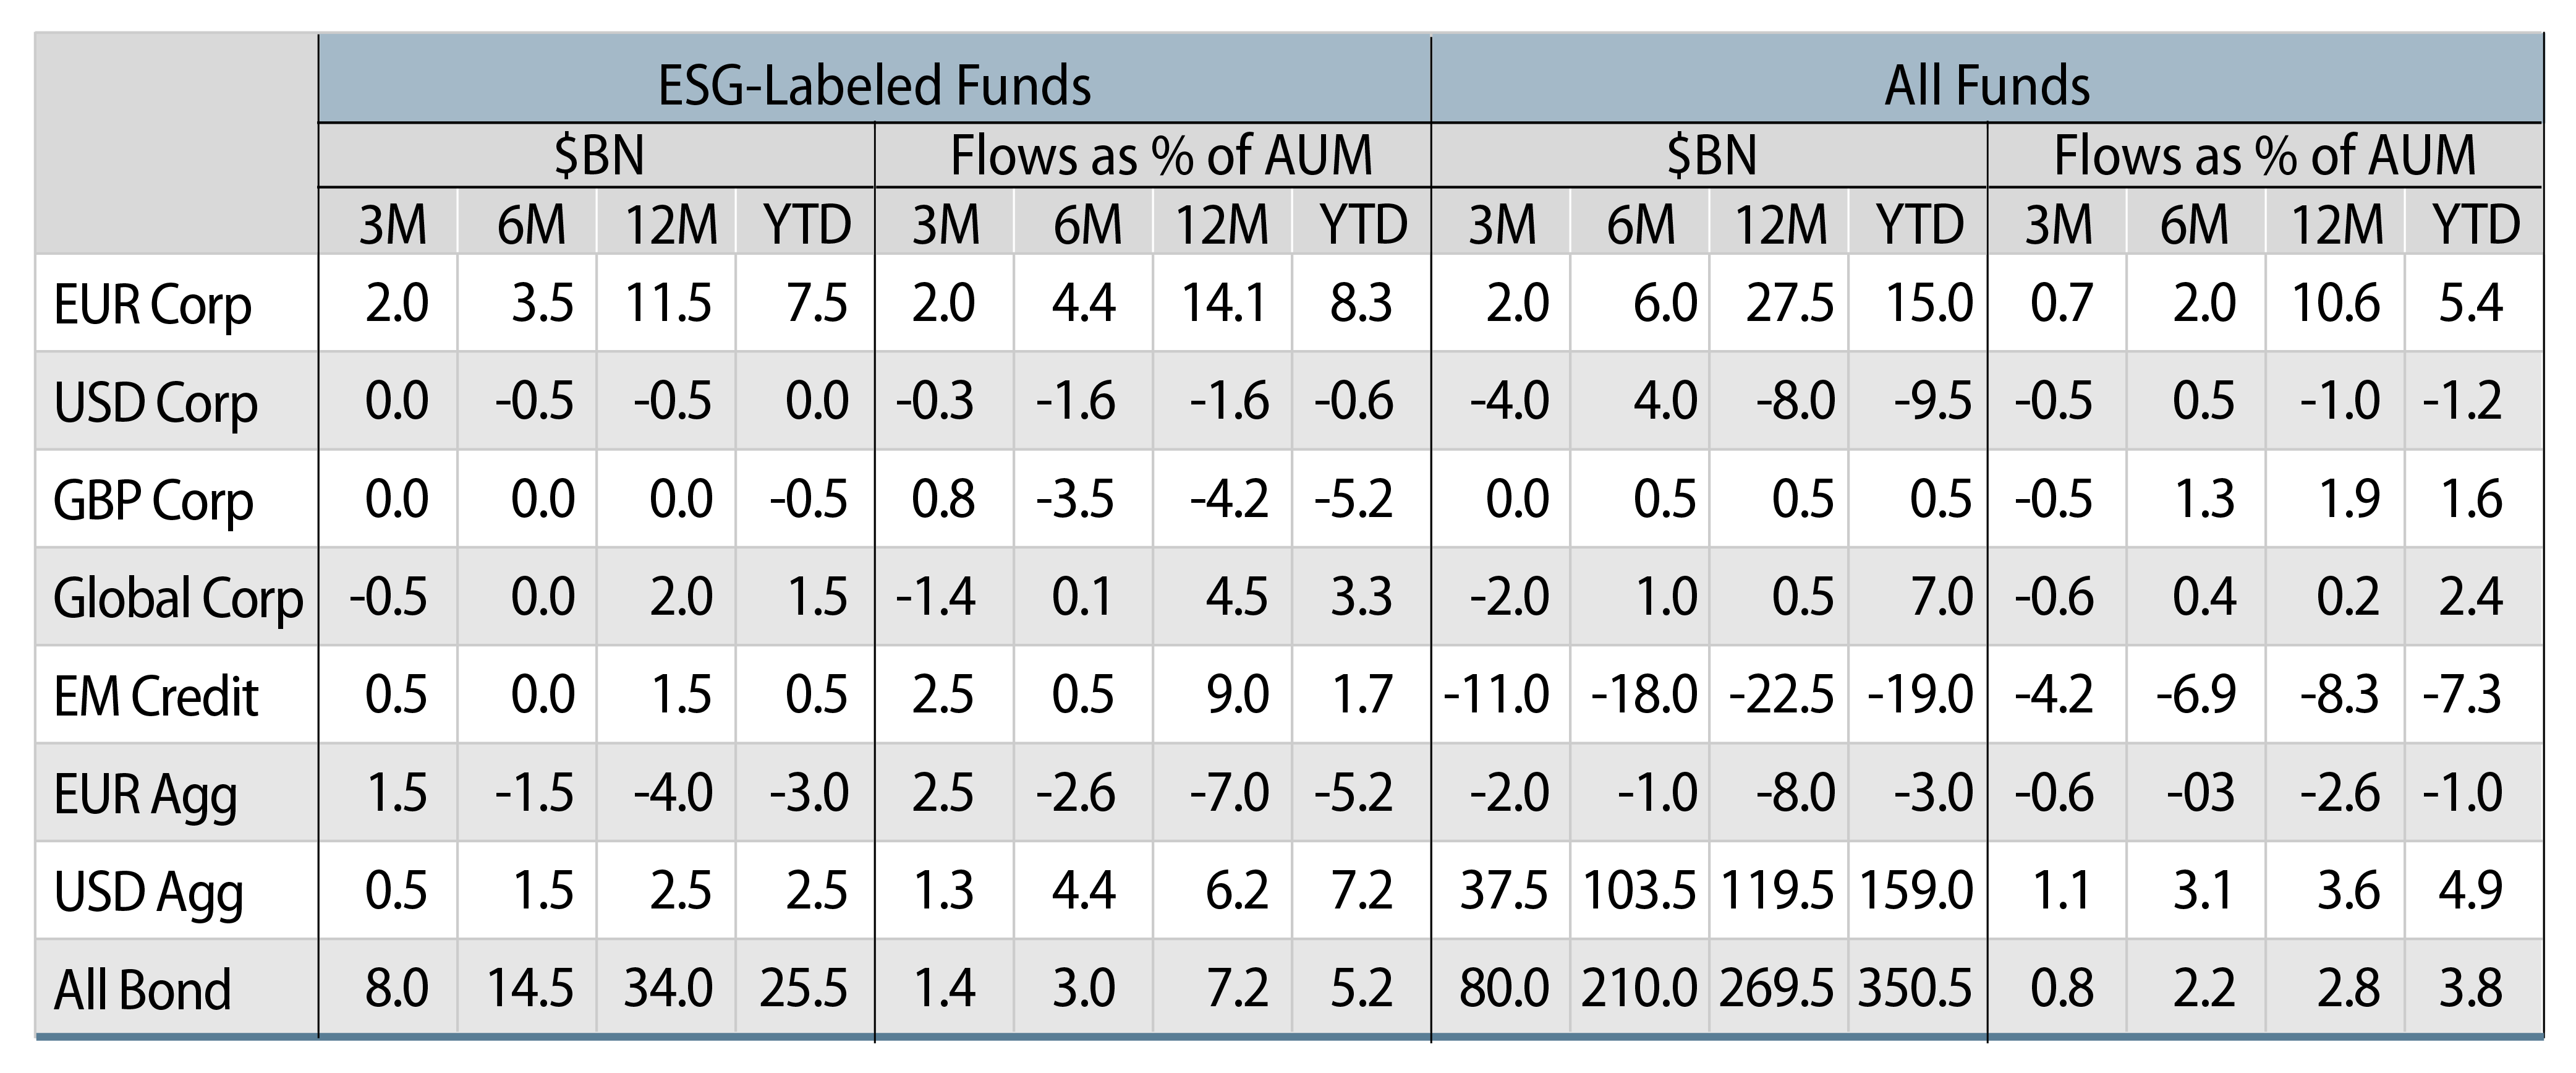 Fixed-Income Fund Flows